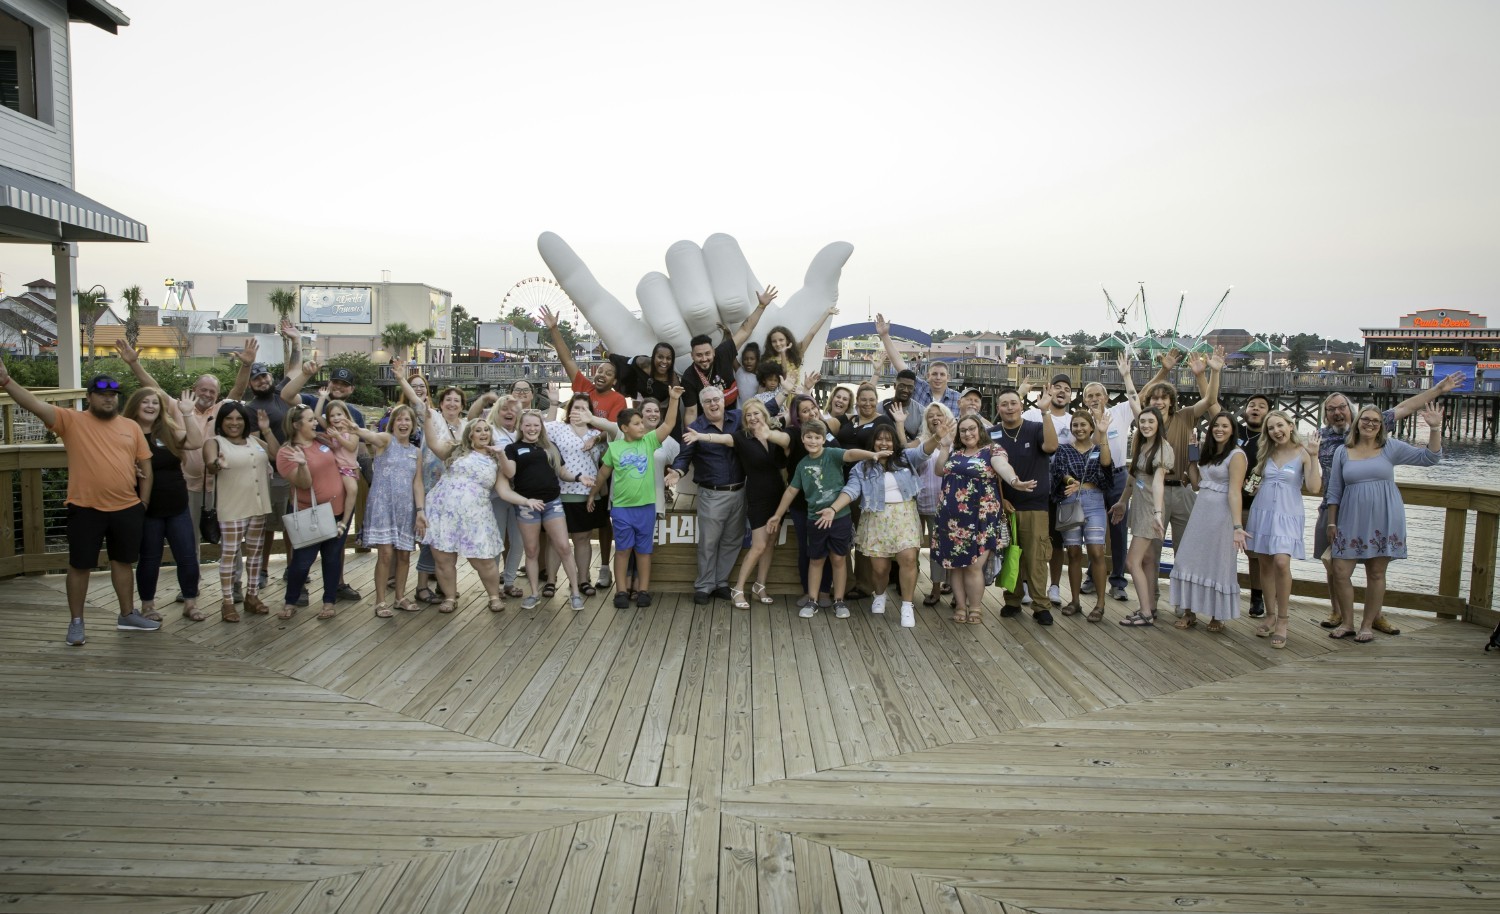 Sandy toes, salty breezes, and seaside feasts – our company beach trip dinner in Myrtle Beach was a shore-ly good time 